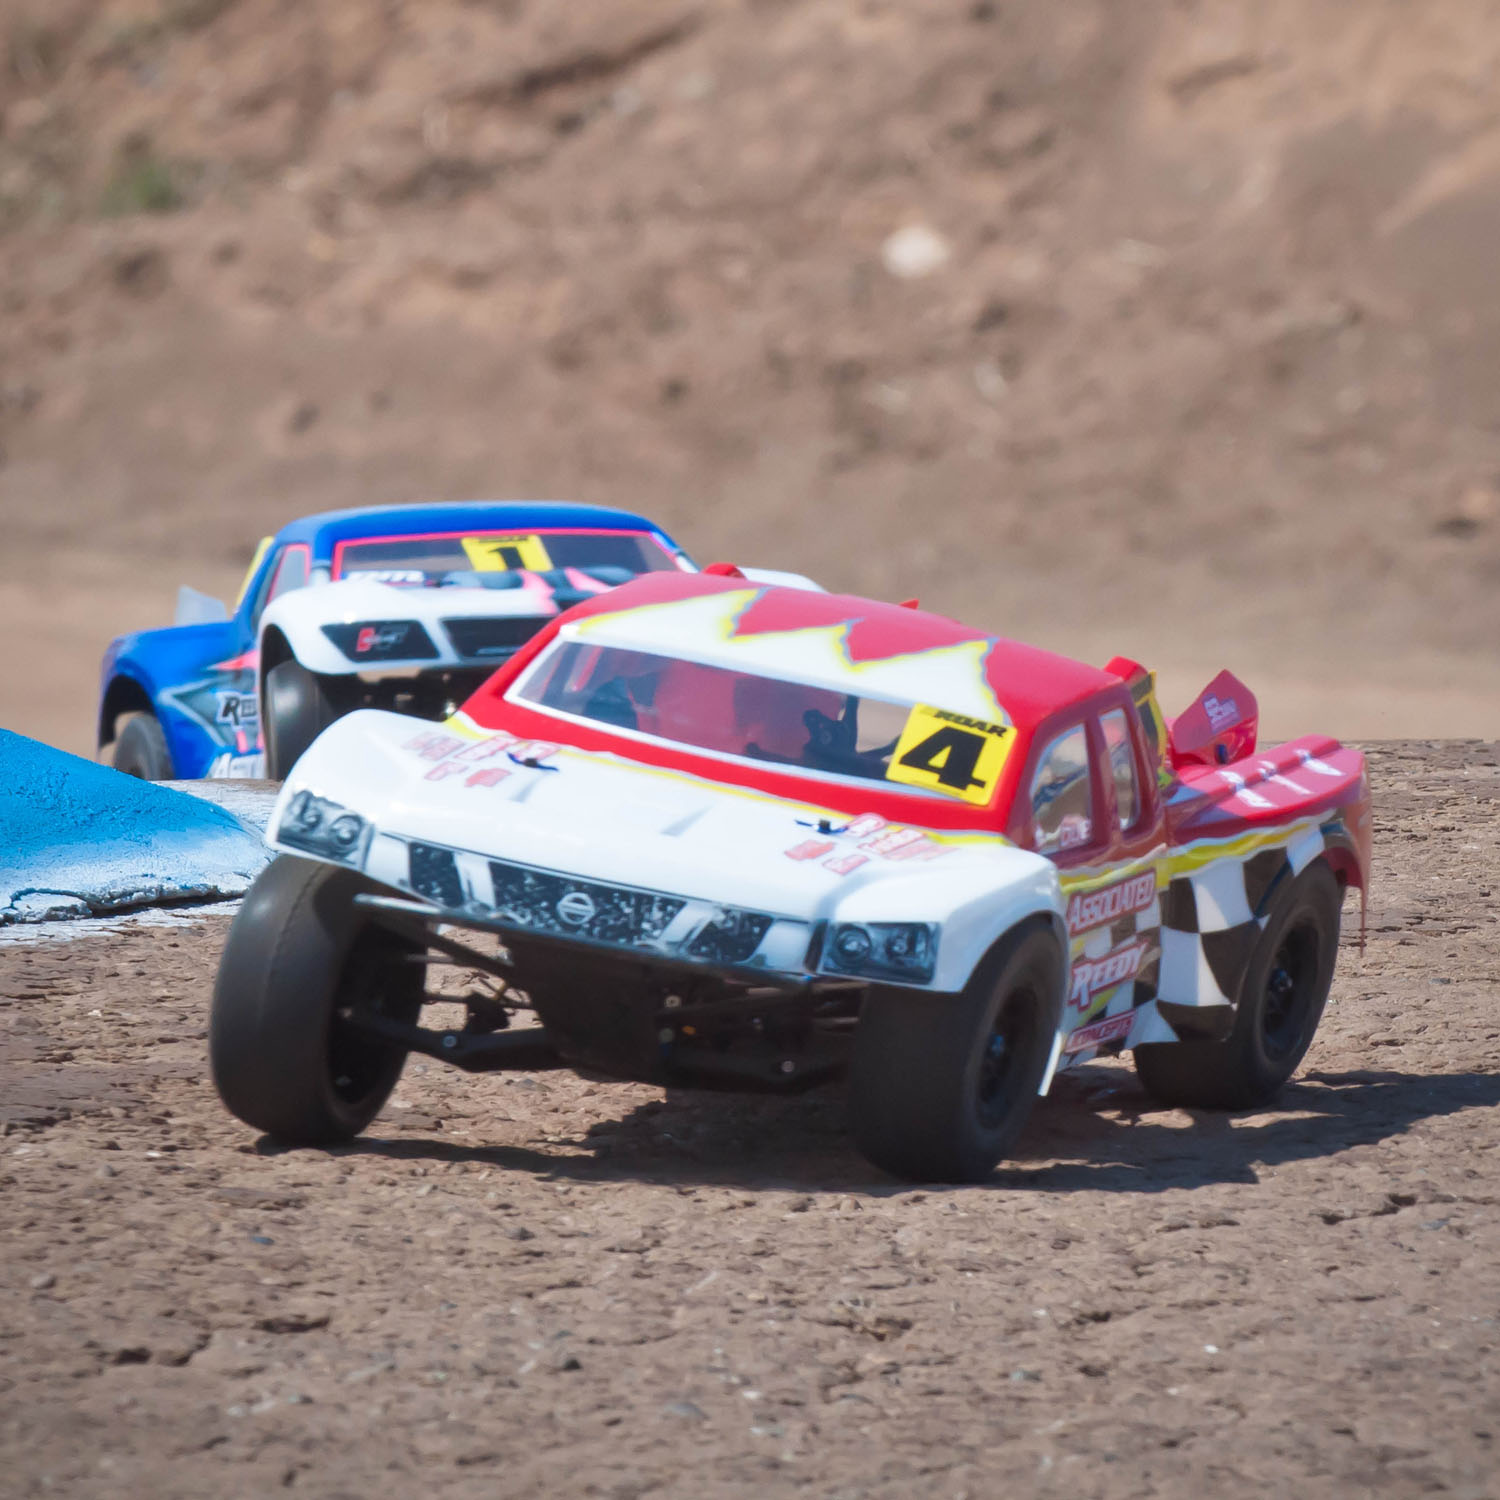 The Sights and Sounds of Saturday at the ROAR Electric Off-Road Nationals!